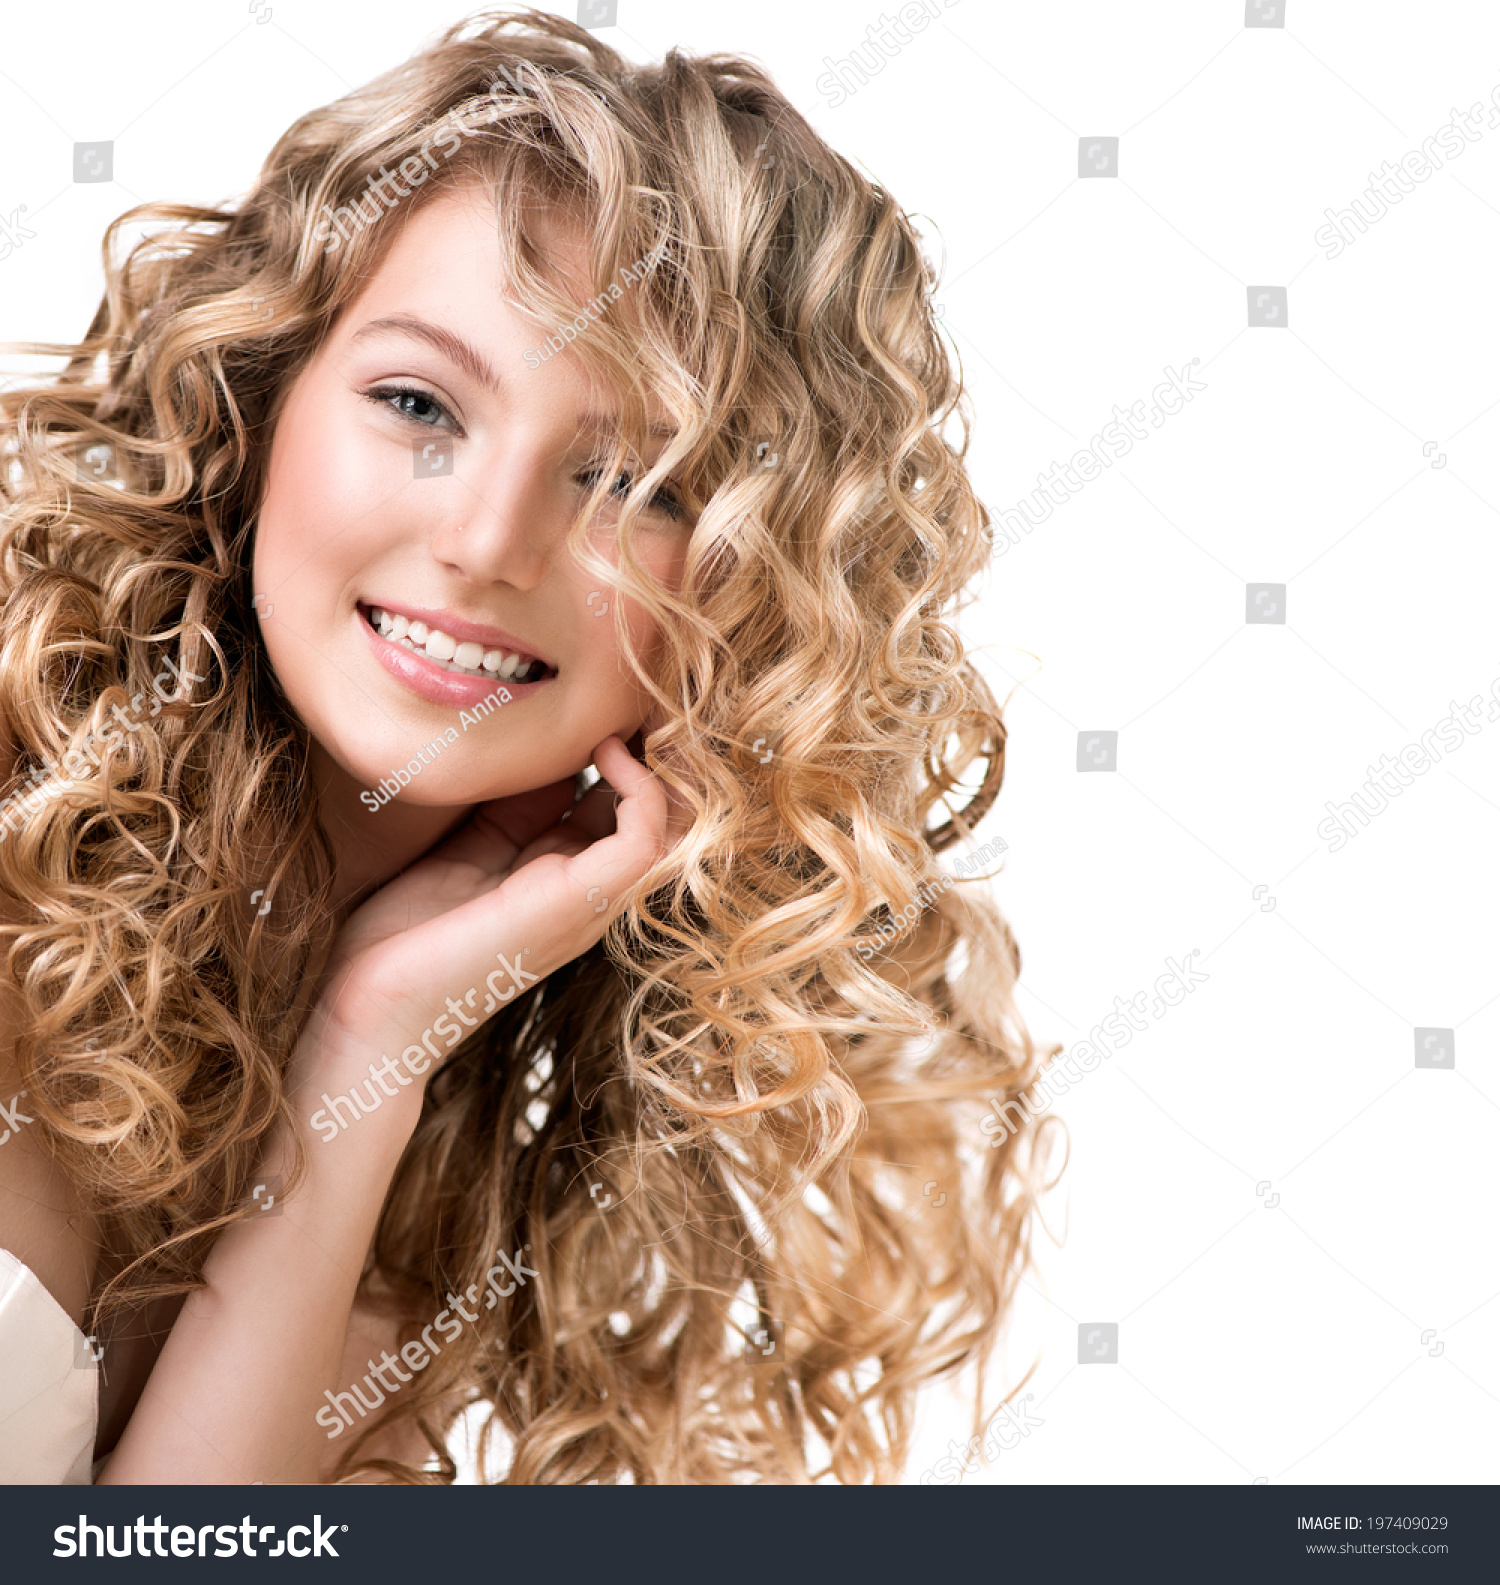 Beauty Girl Blonde Curly Hair Healthy Stockfoto Jetzt